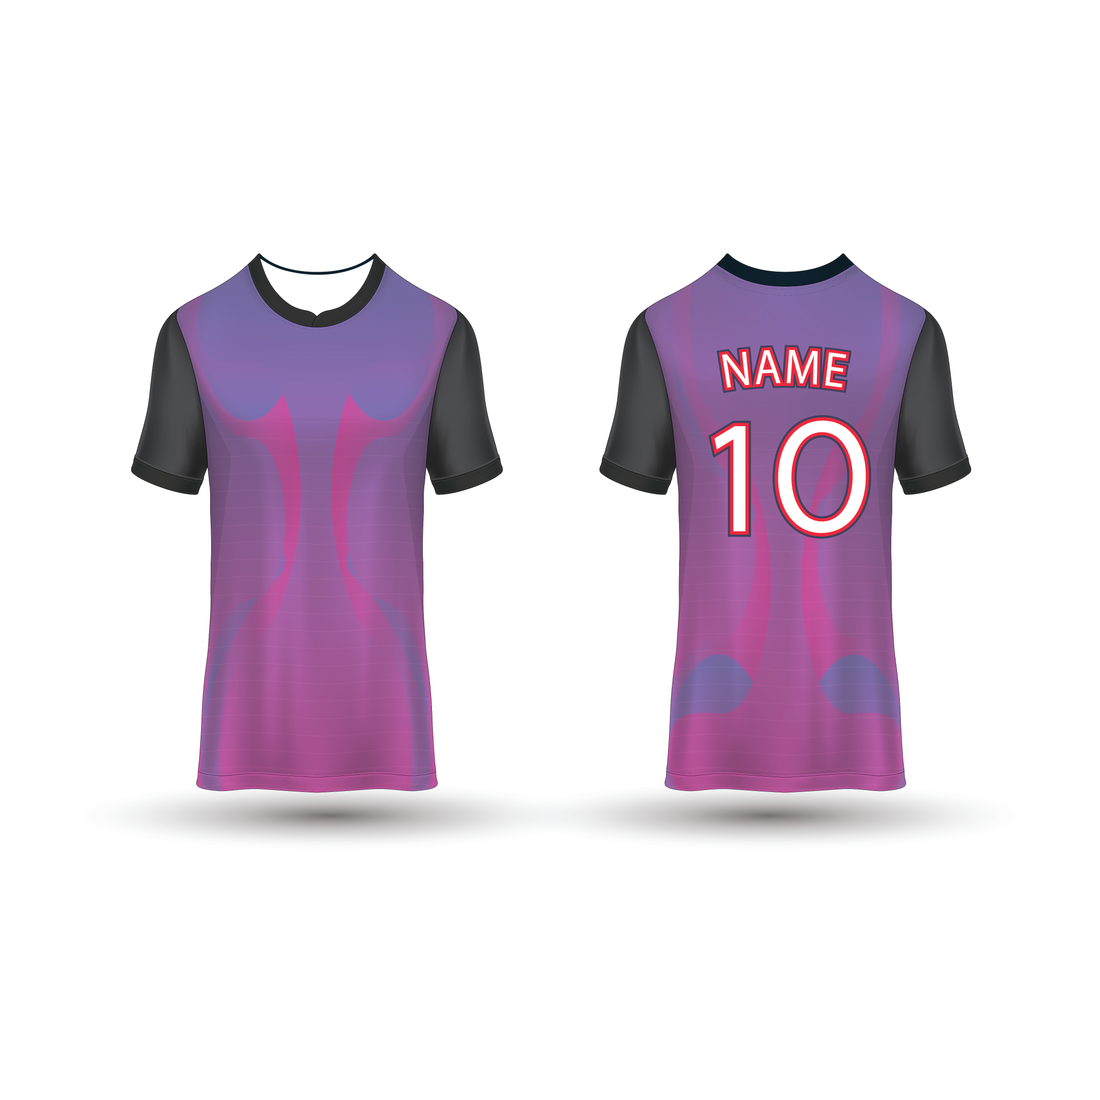 NEXT PRINT All Over Printed Customized Sublimation T-Shirt Unisex Sports Jersey Player Name & Number, Team Name NP50000231